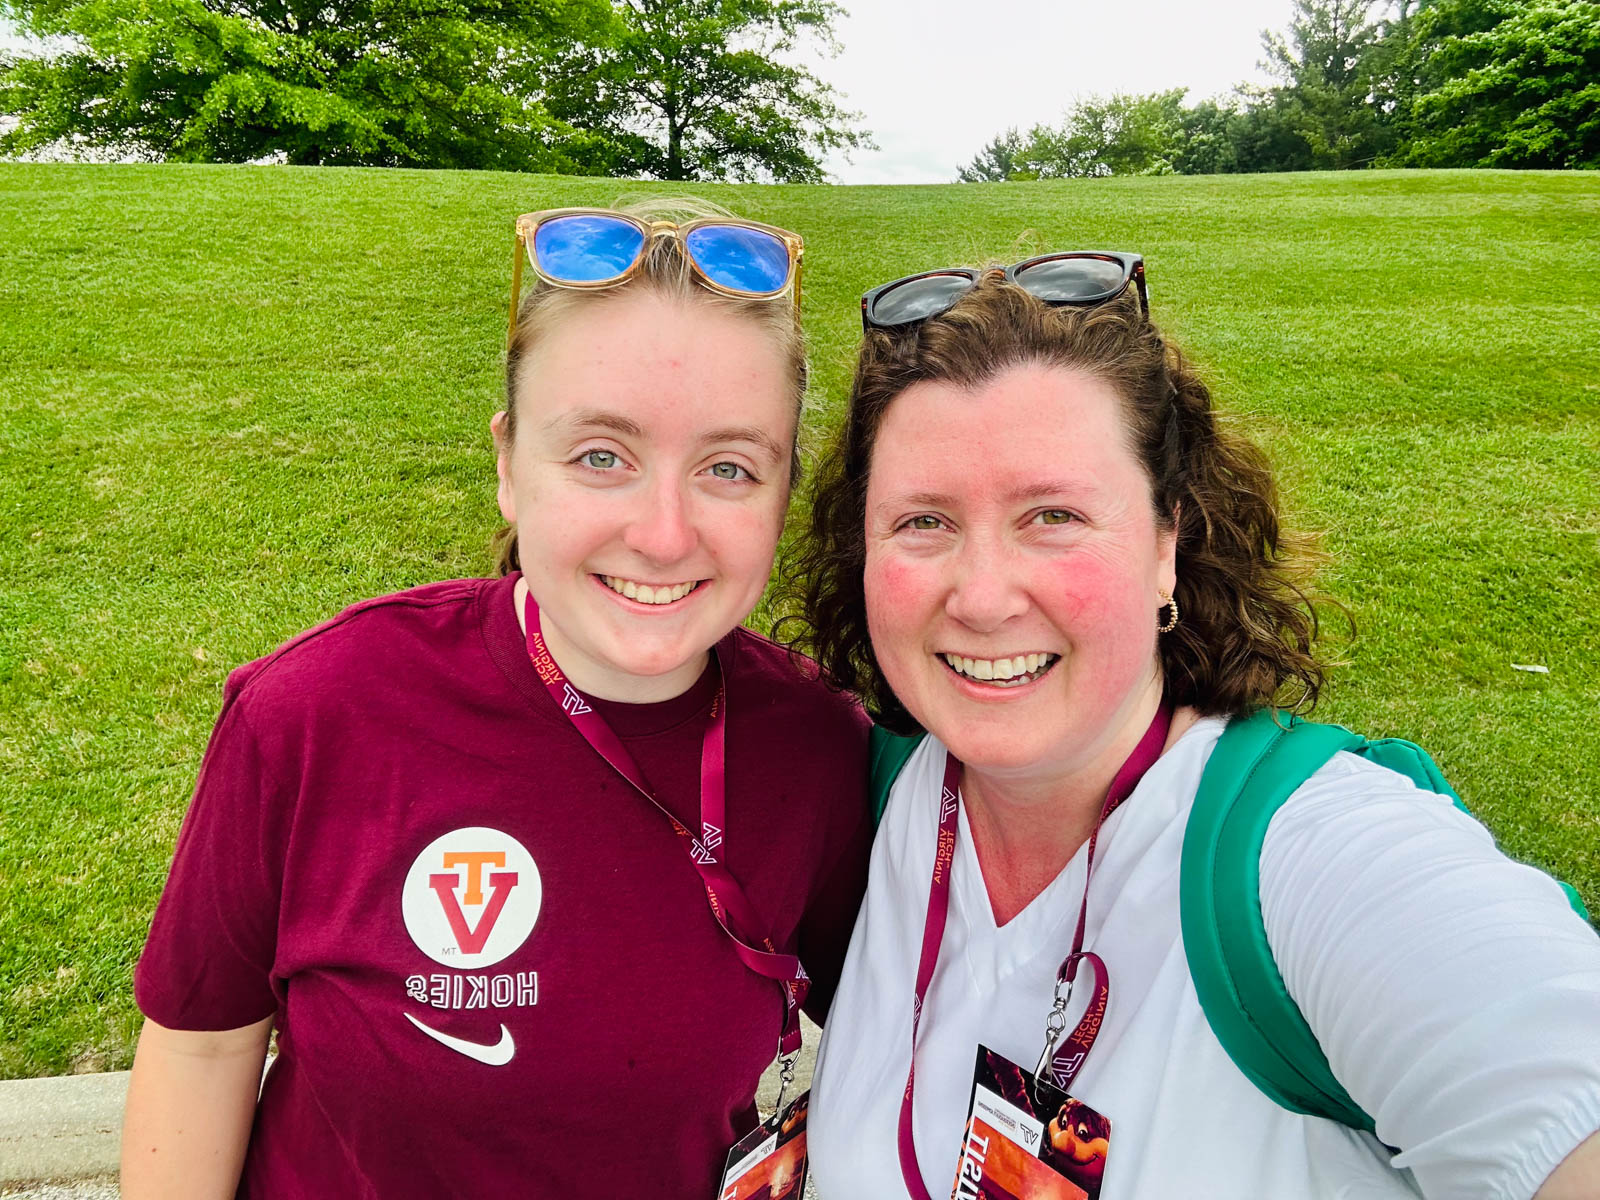 A mom and daughter visiting Virginia Tech.